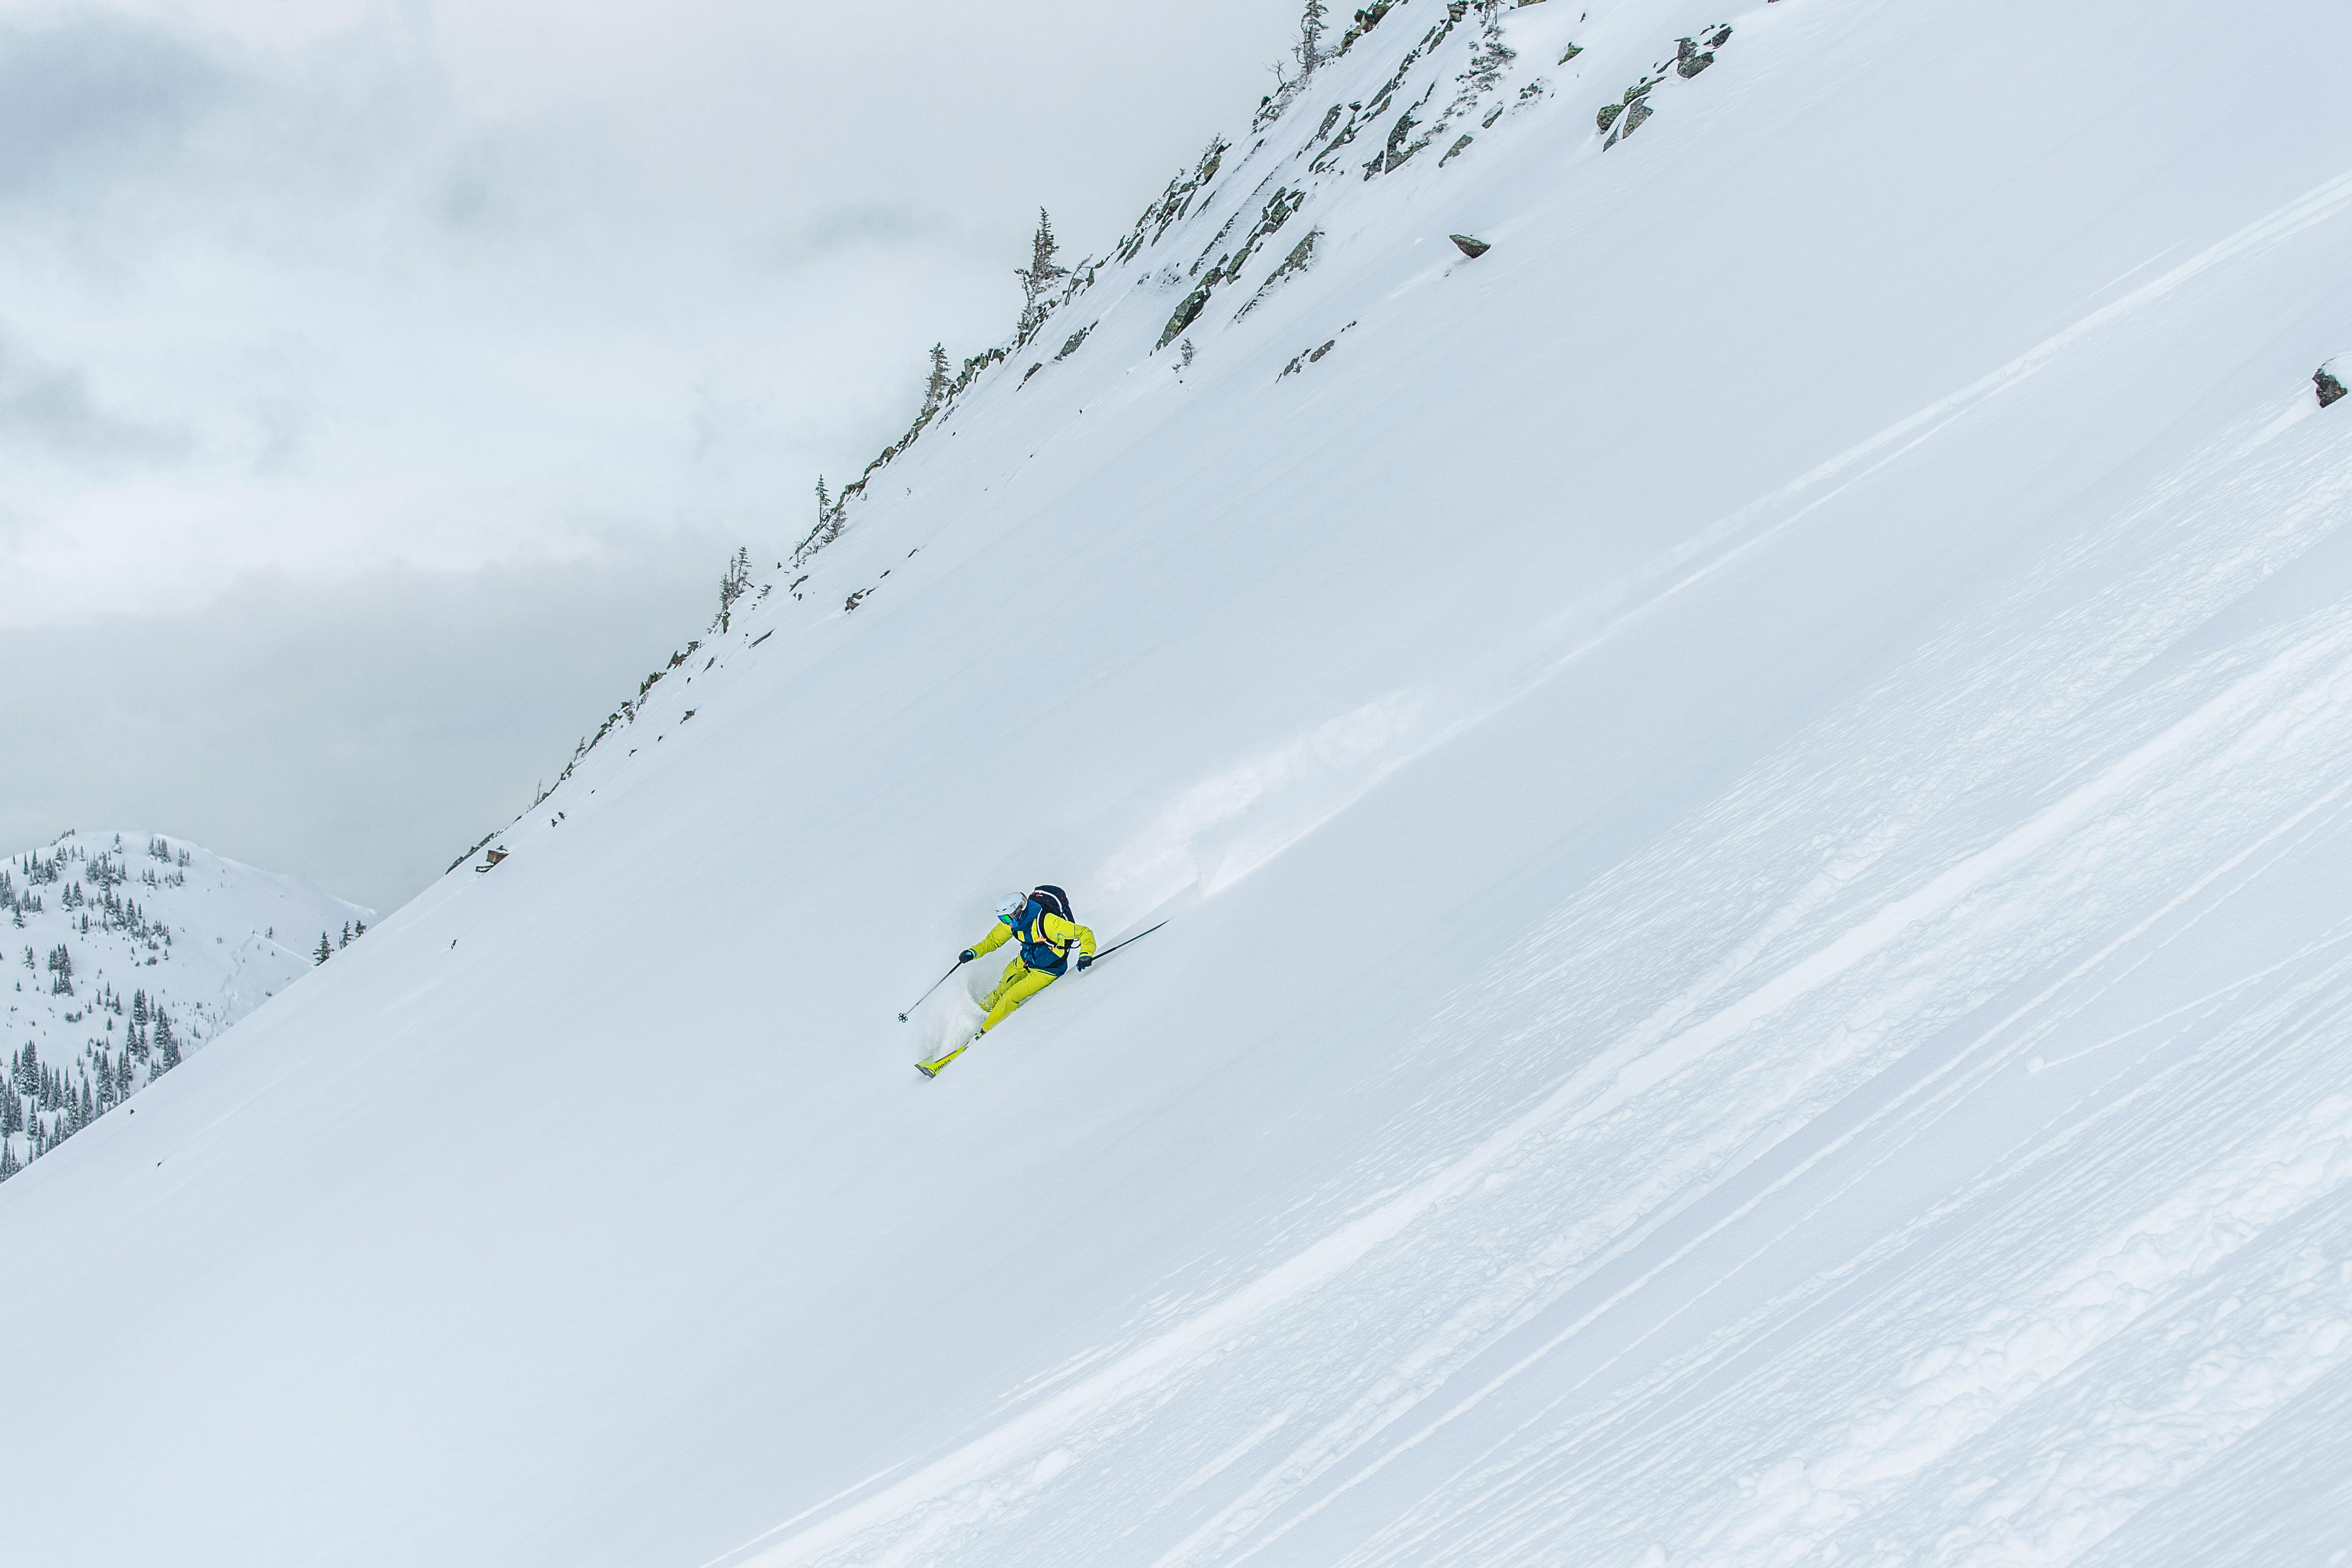 A skier bombing down a steep slope